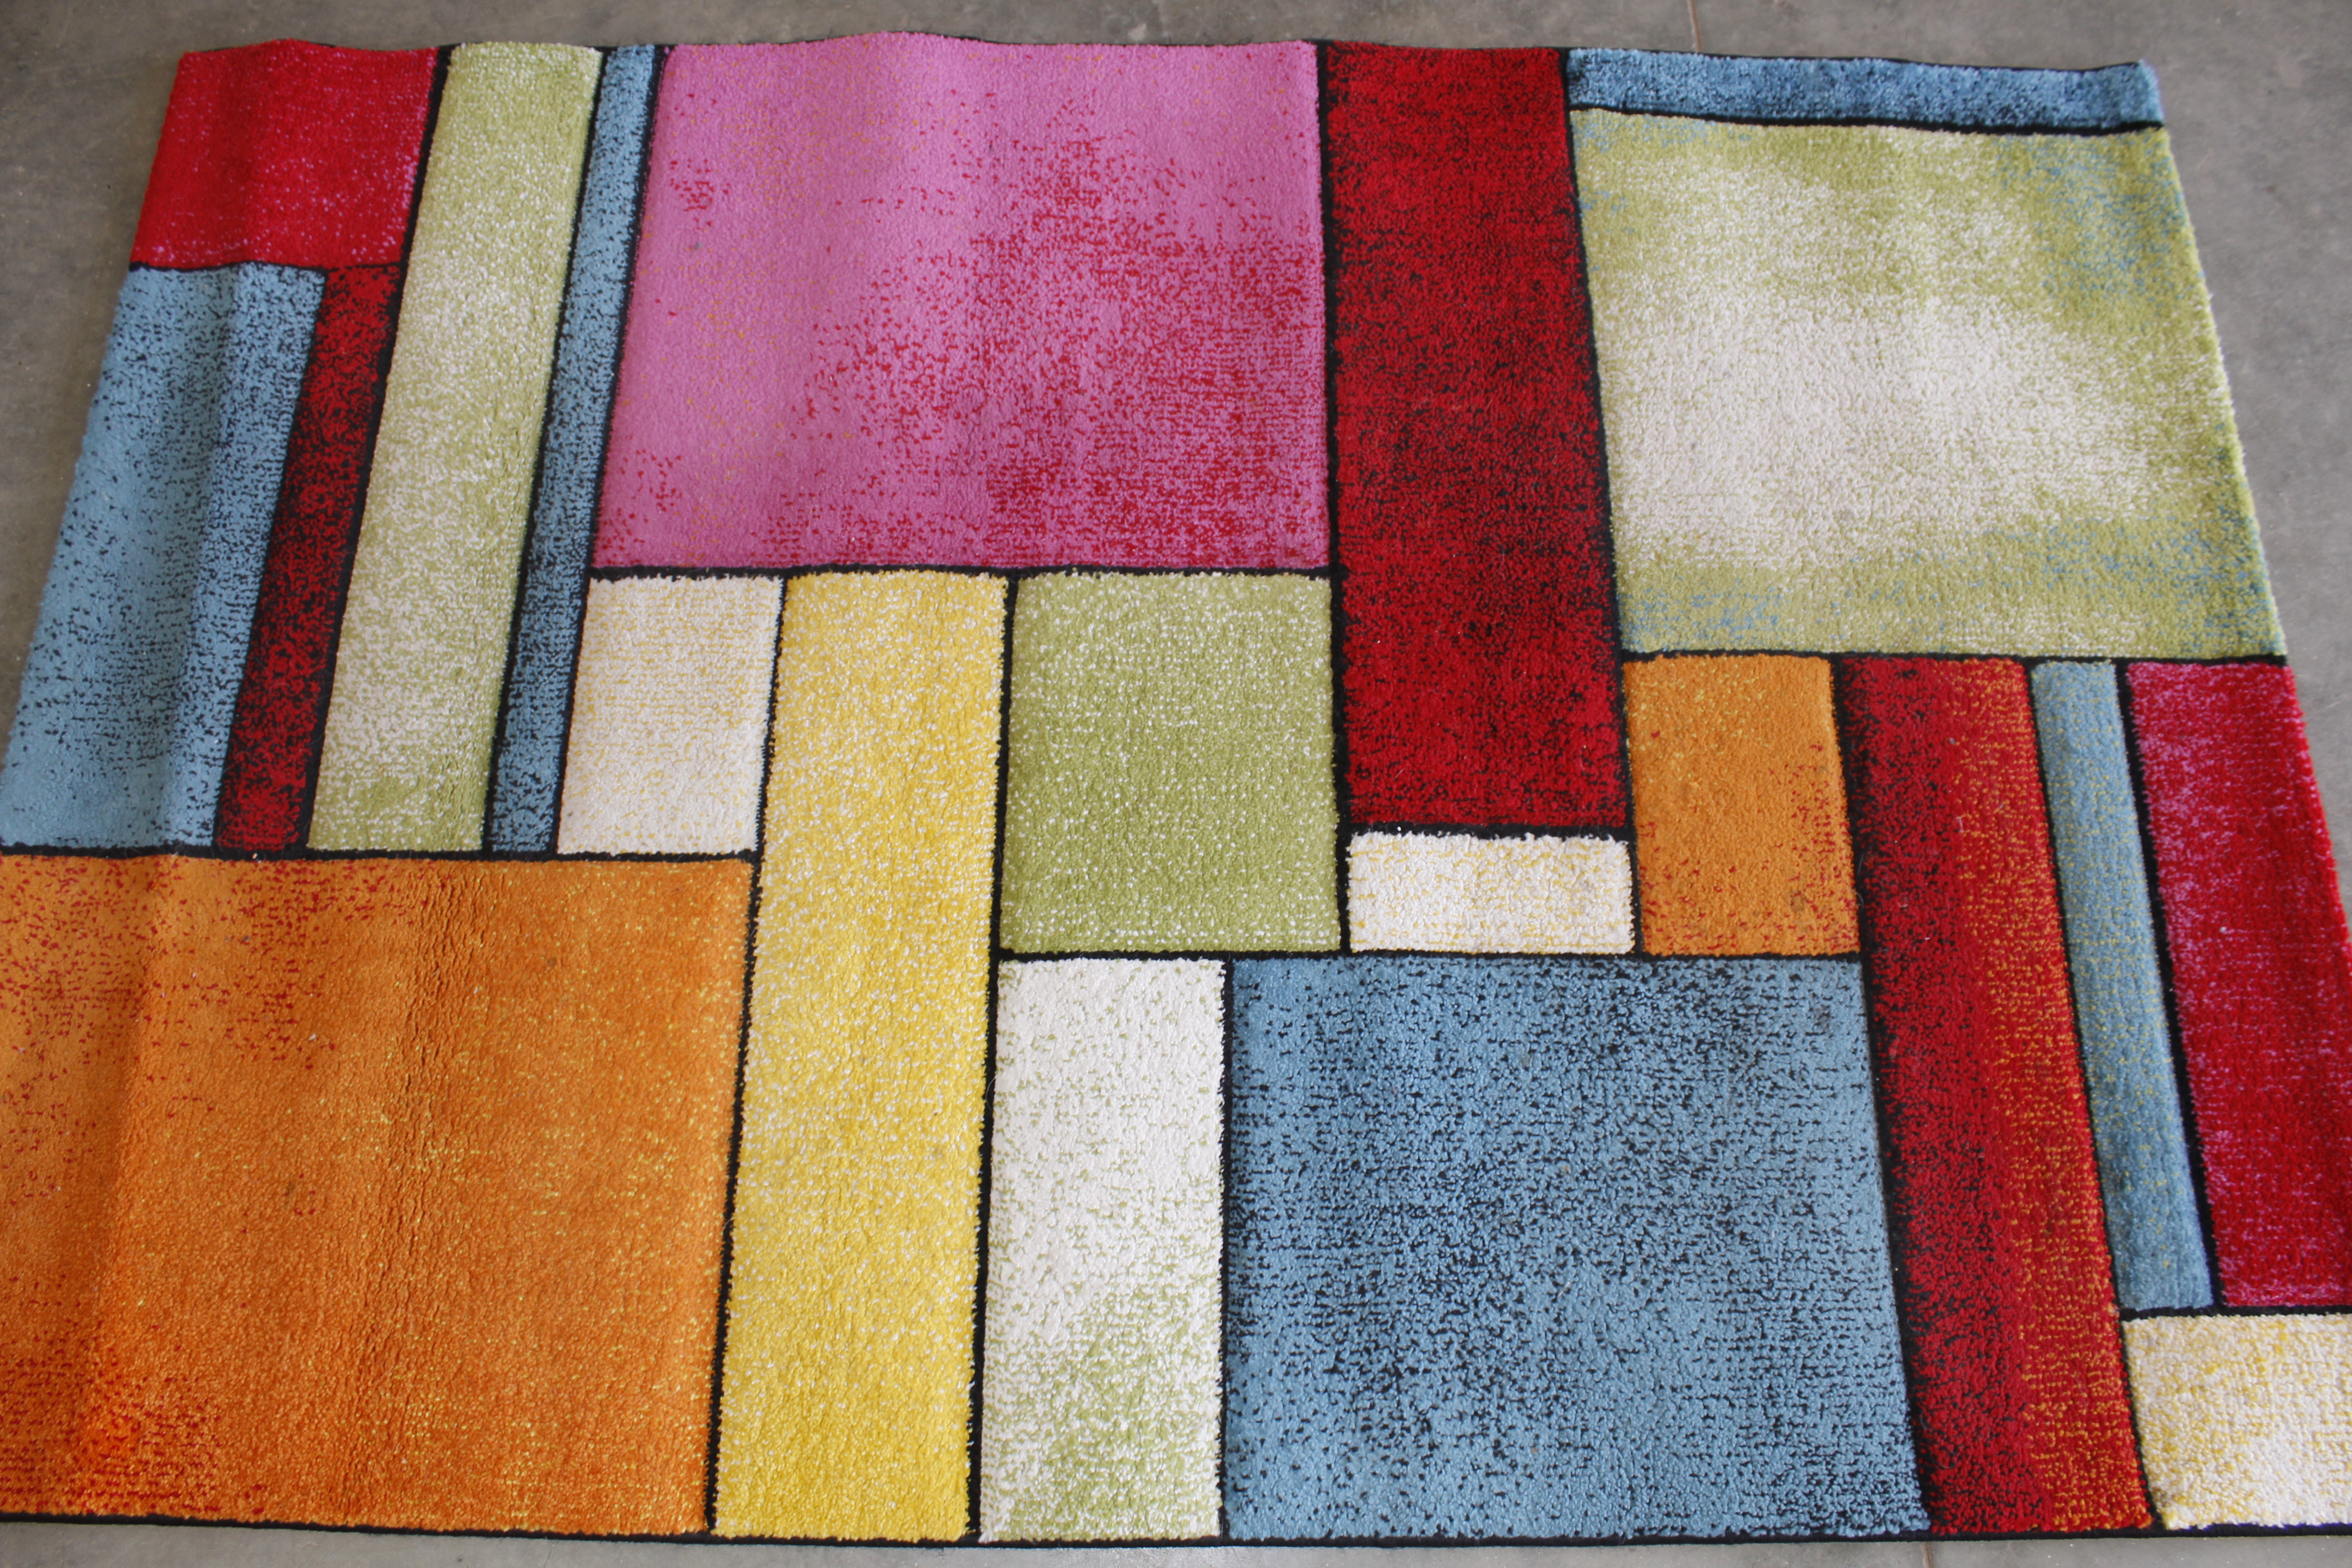 An approx. 5'8" x 4' modern patterned rug - Image 2 of 3